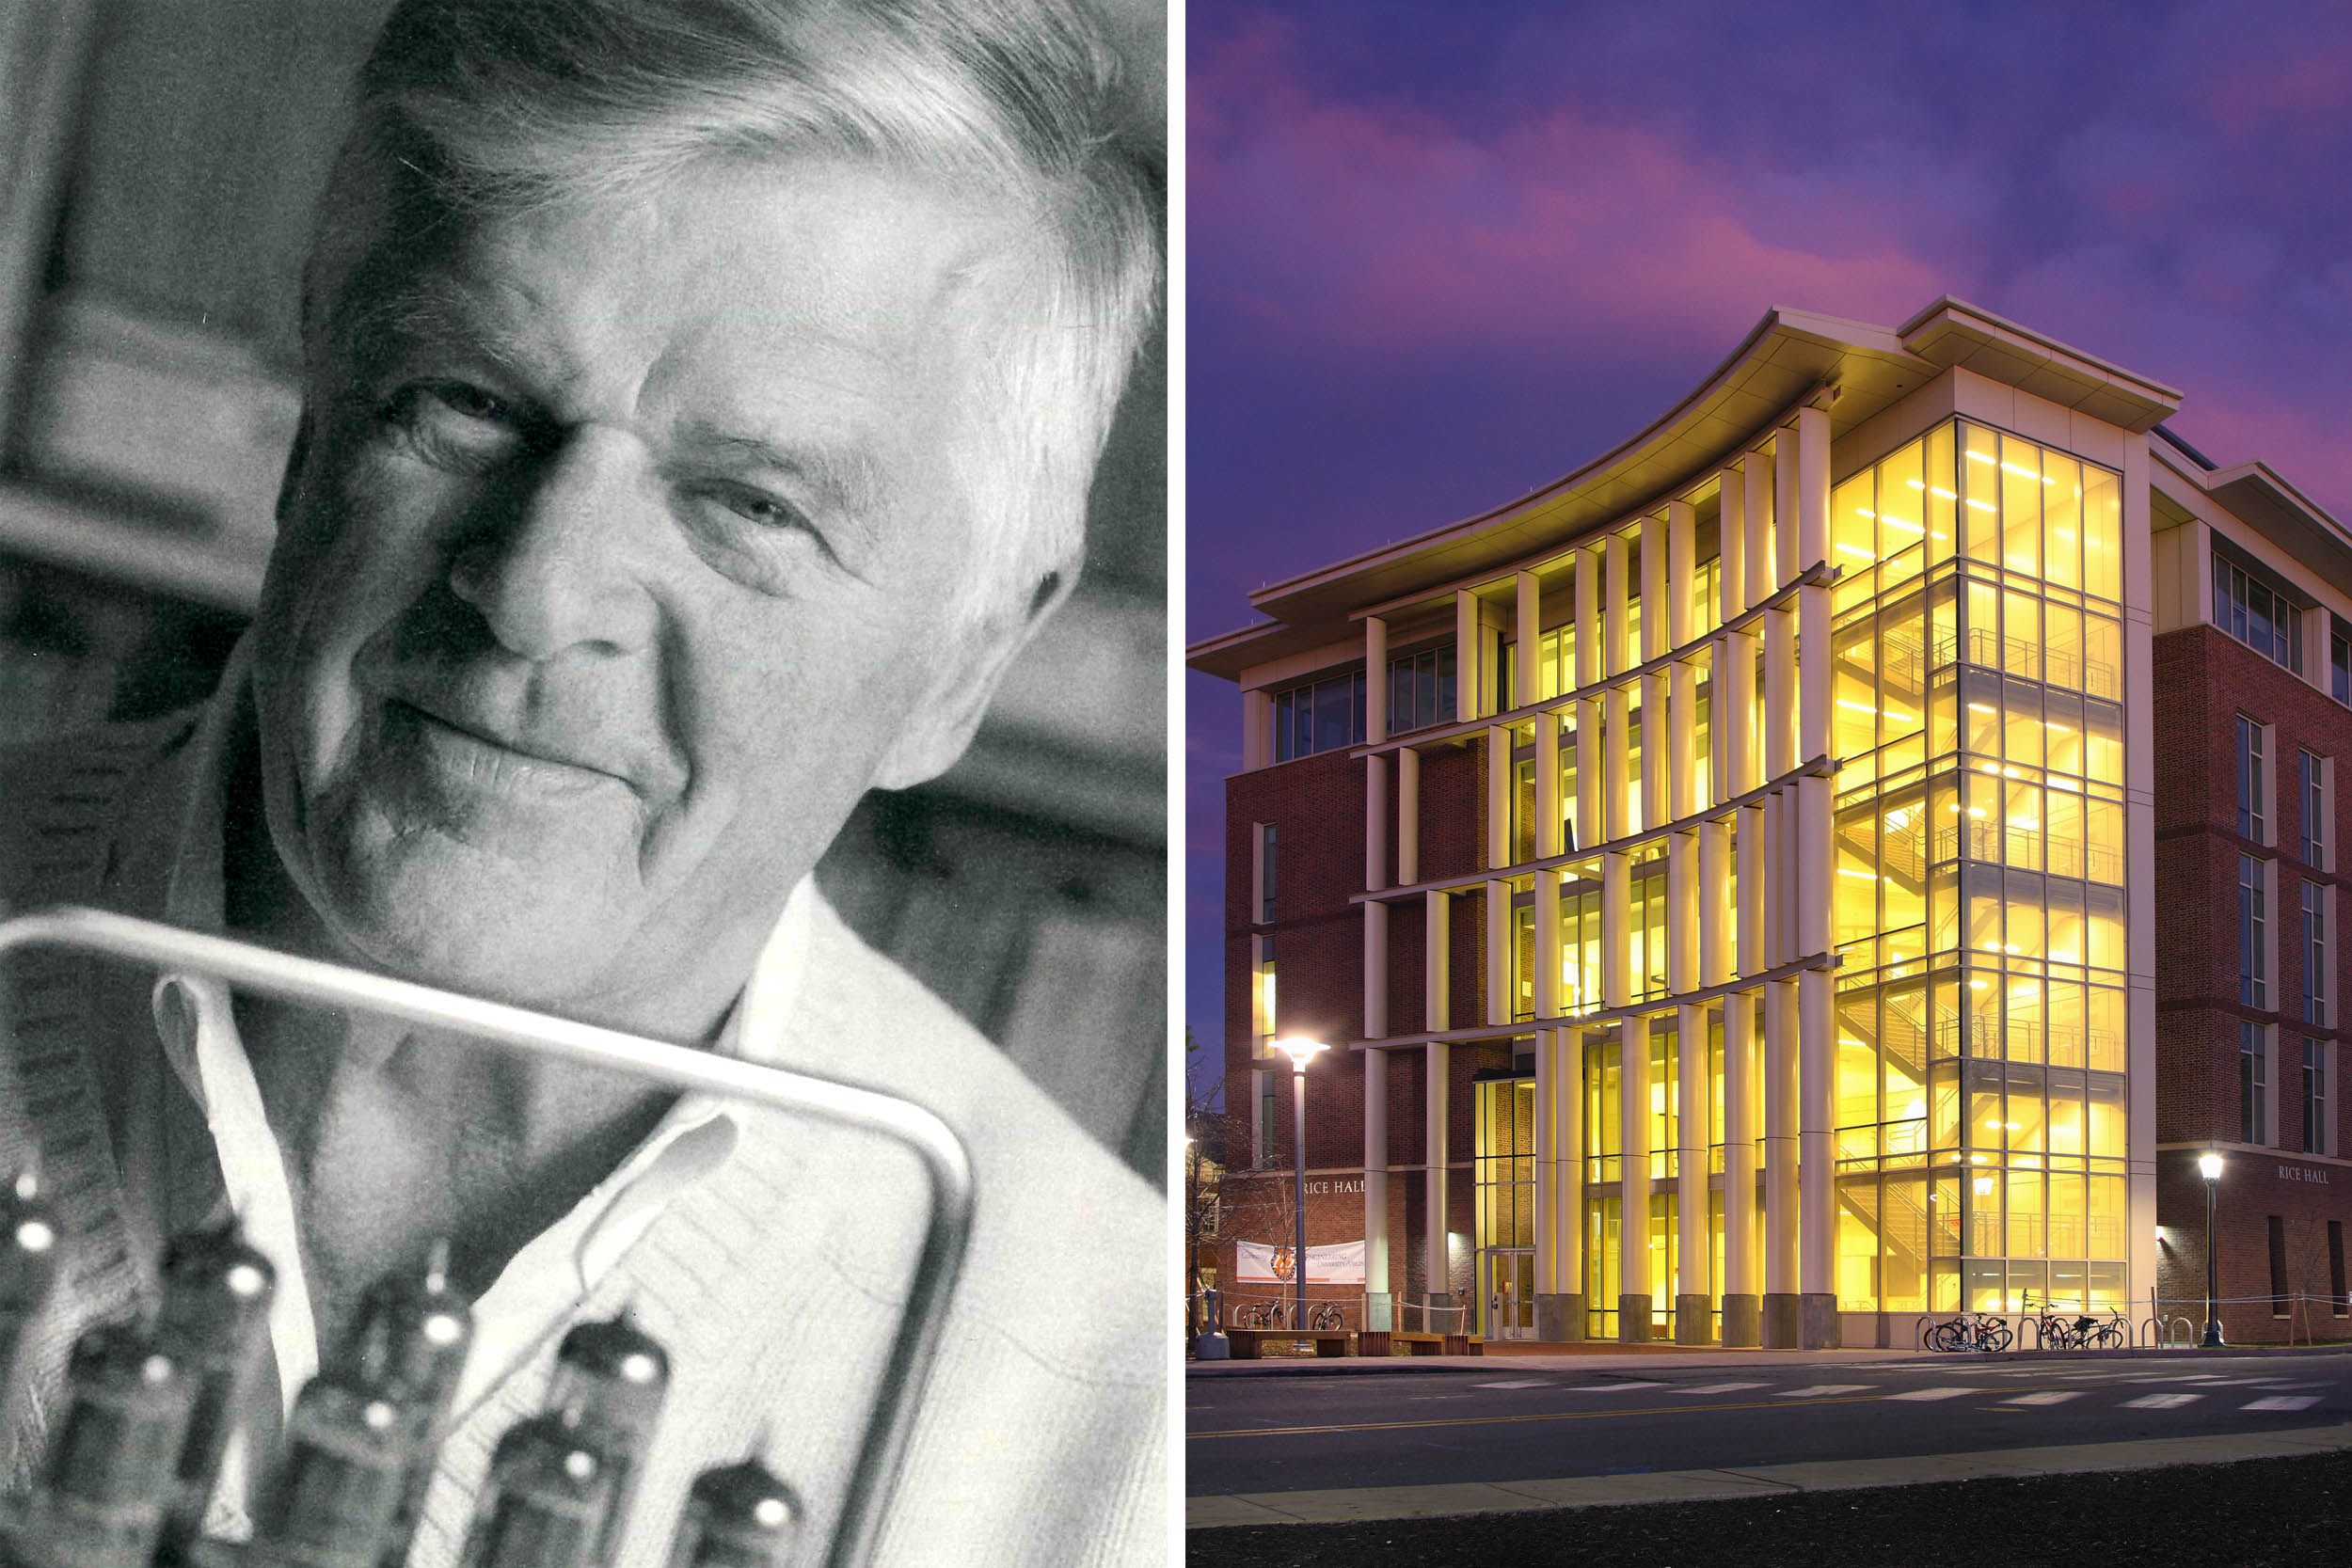 left: Alan Batson headshot.  right: building of the Computer Science building lit up at night